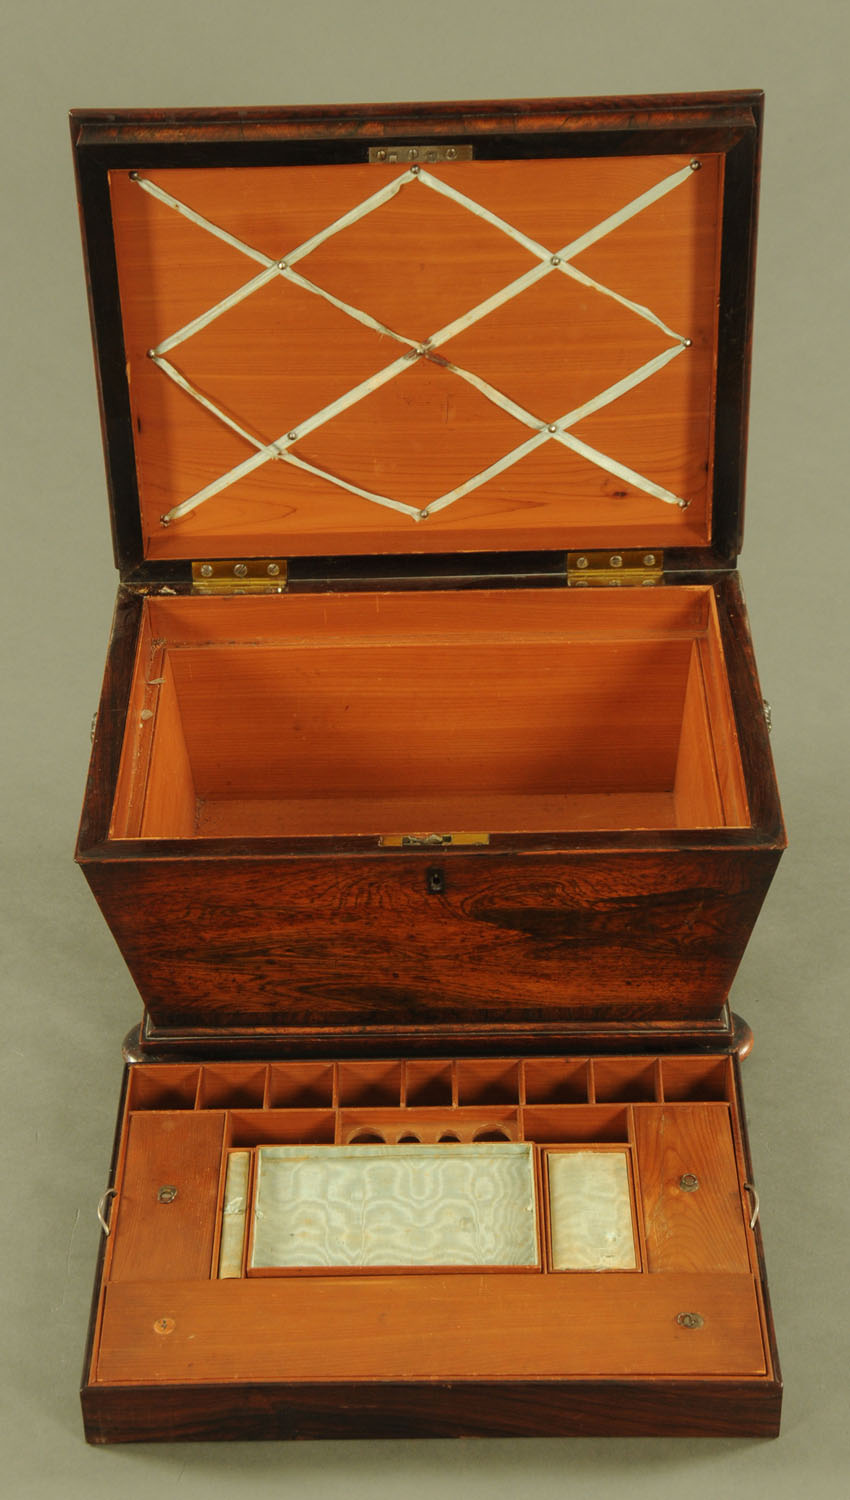 A Regency rosewood table box, with bronze handles, sarcophagus form with interior fitted for sewing. - Image 2 of 10